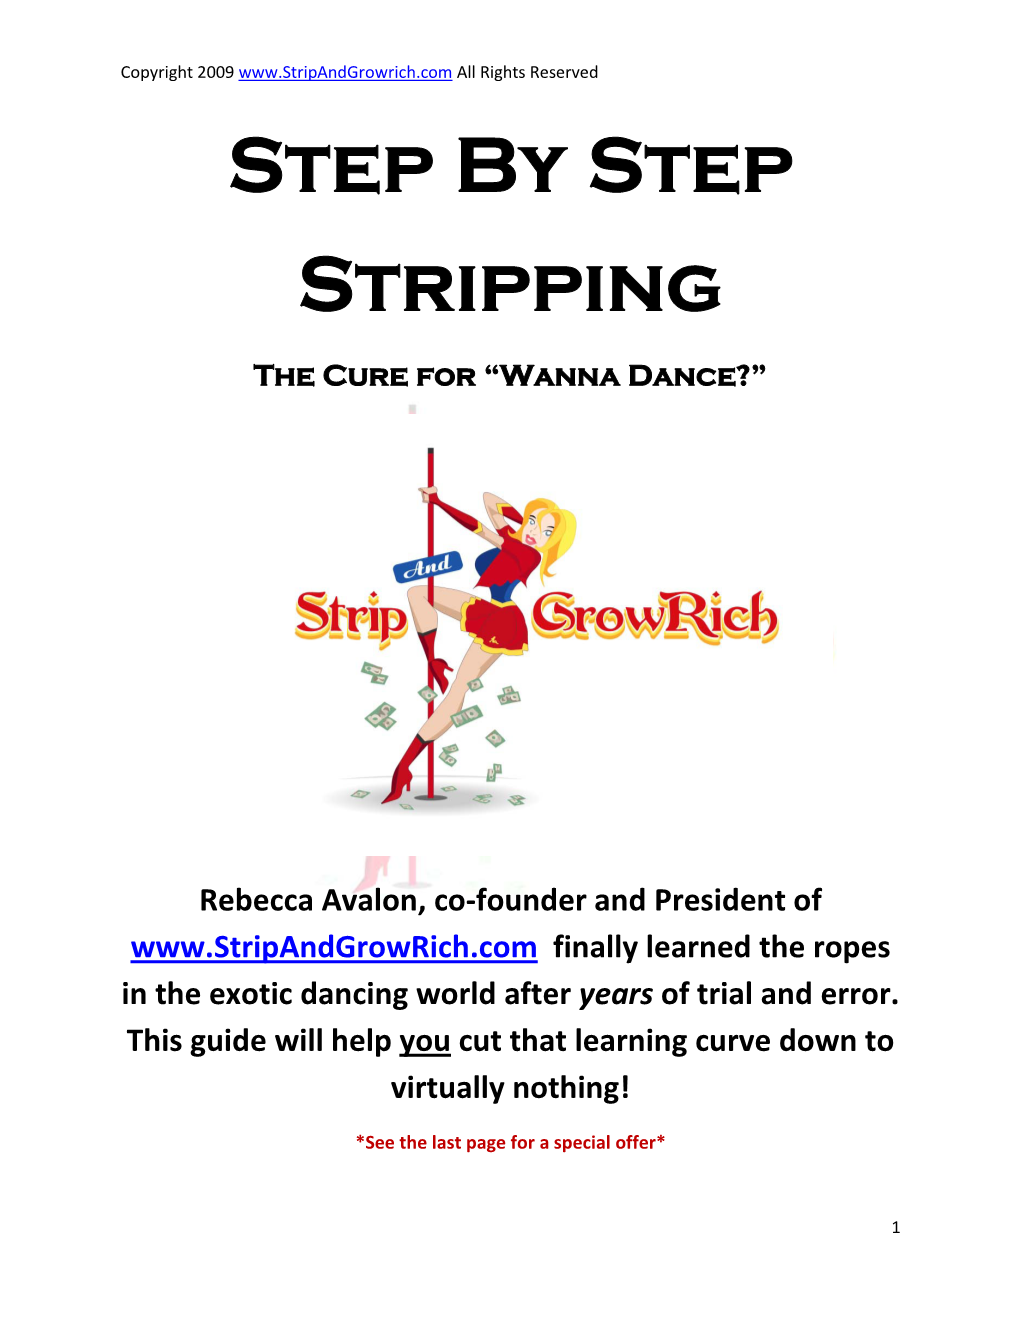 Step by Step Stripping